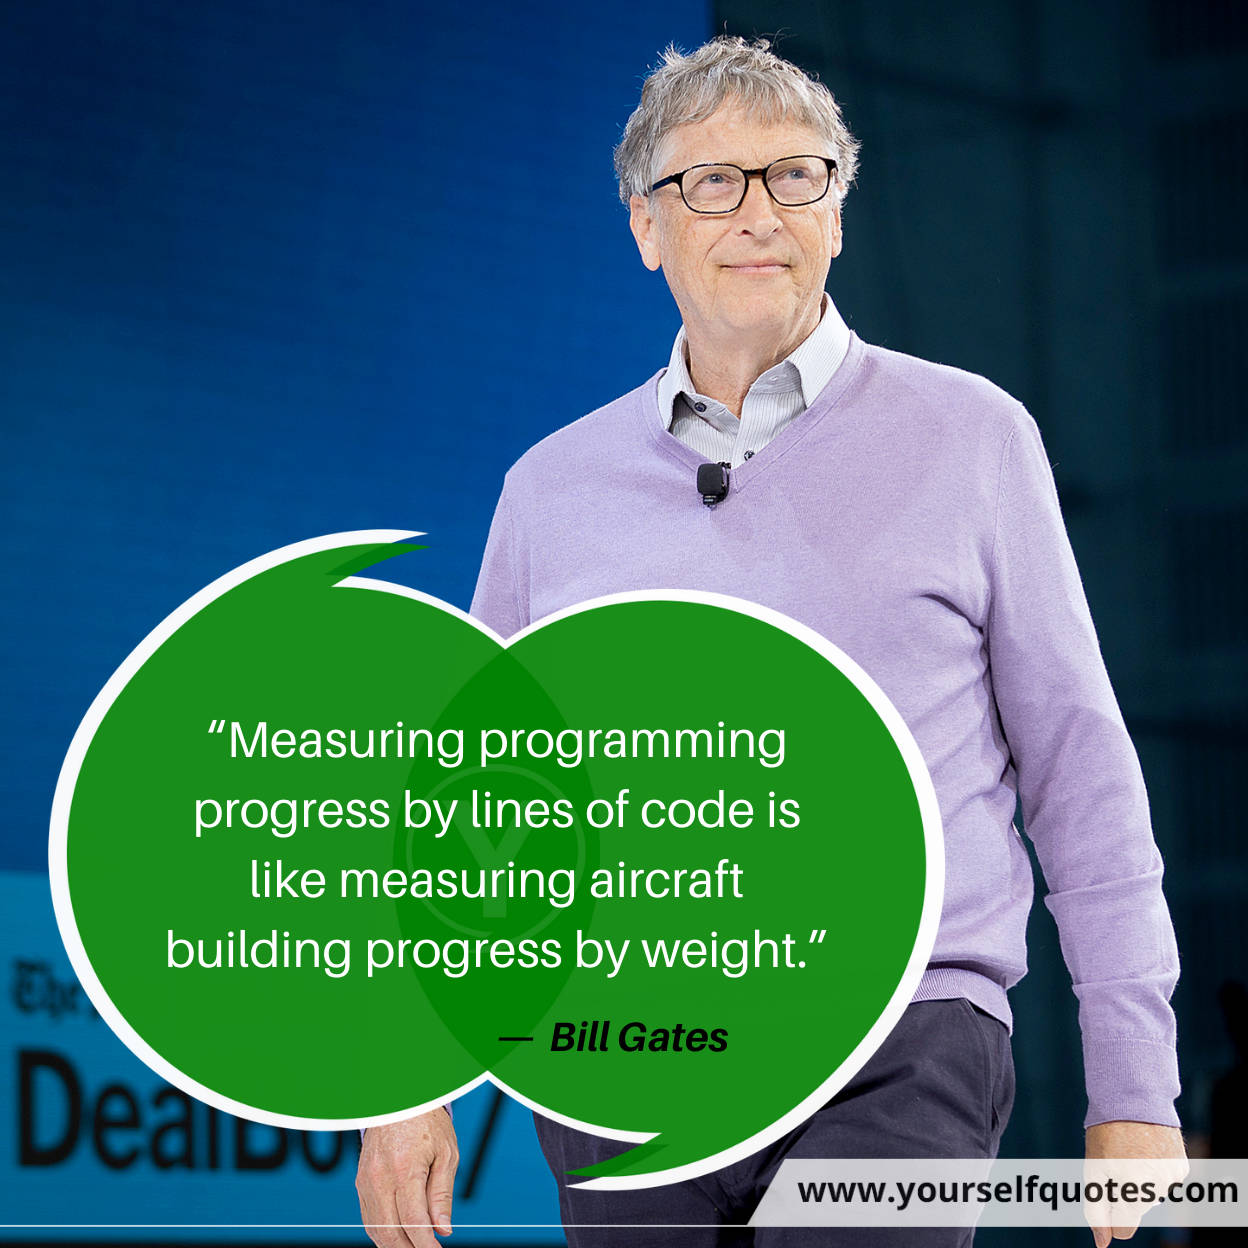 Bill Gates Quotes Images